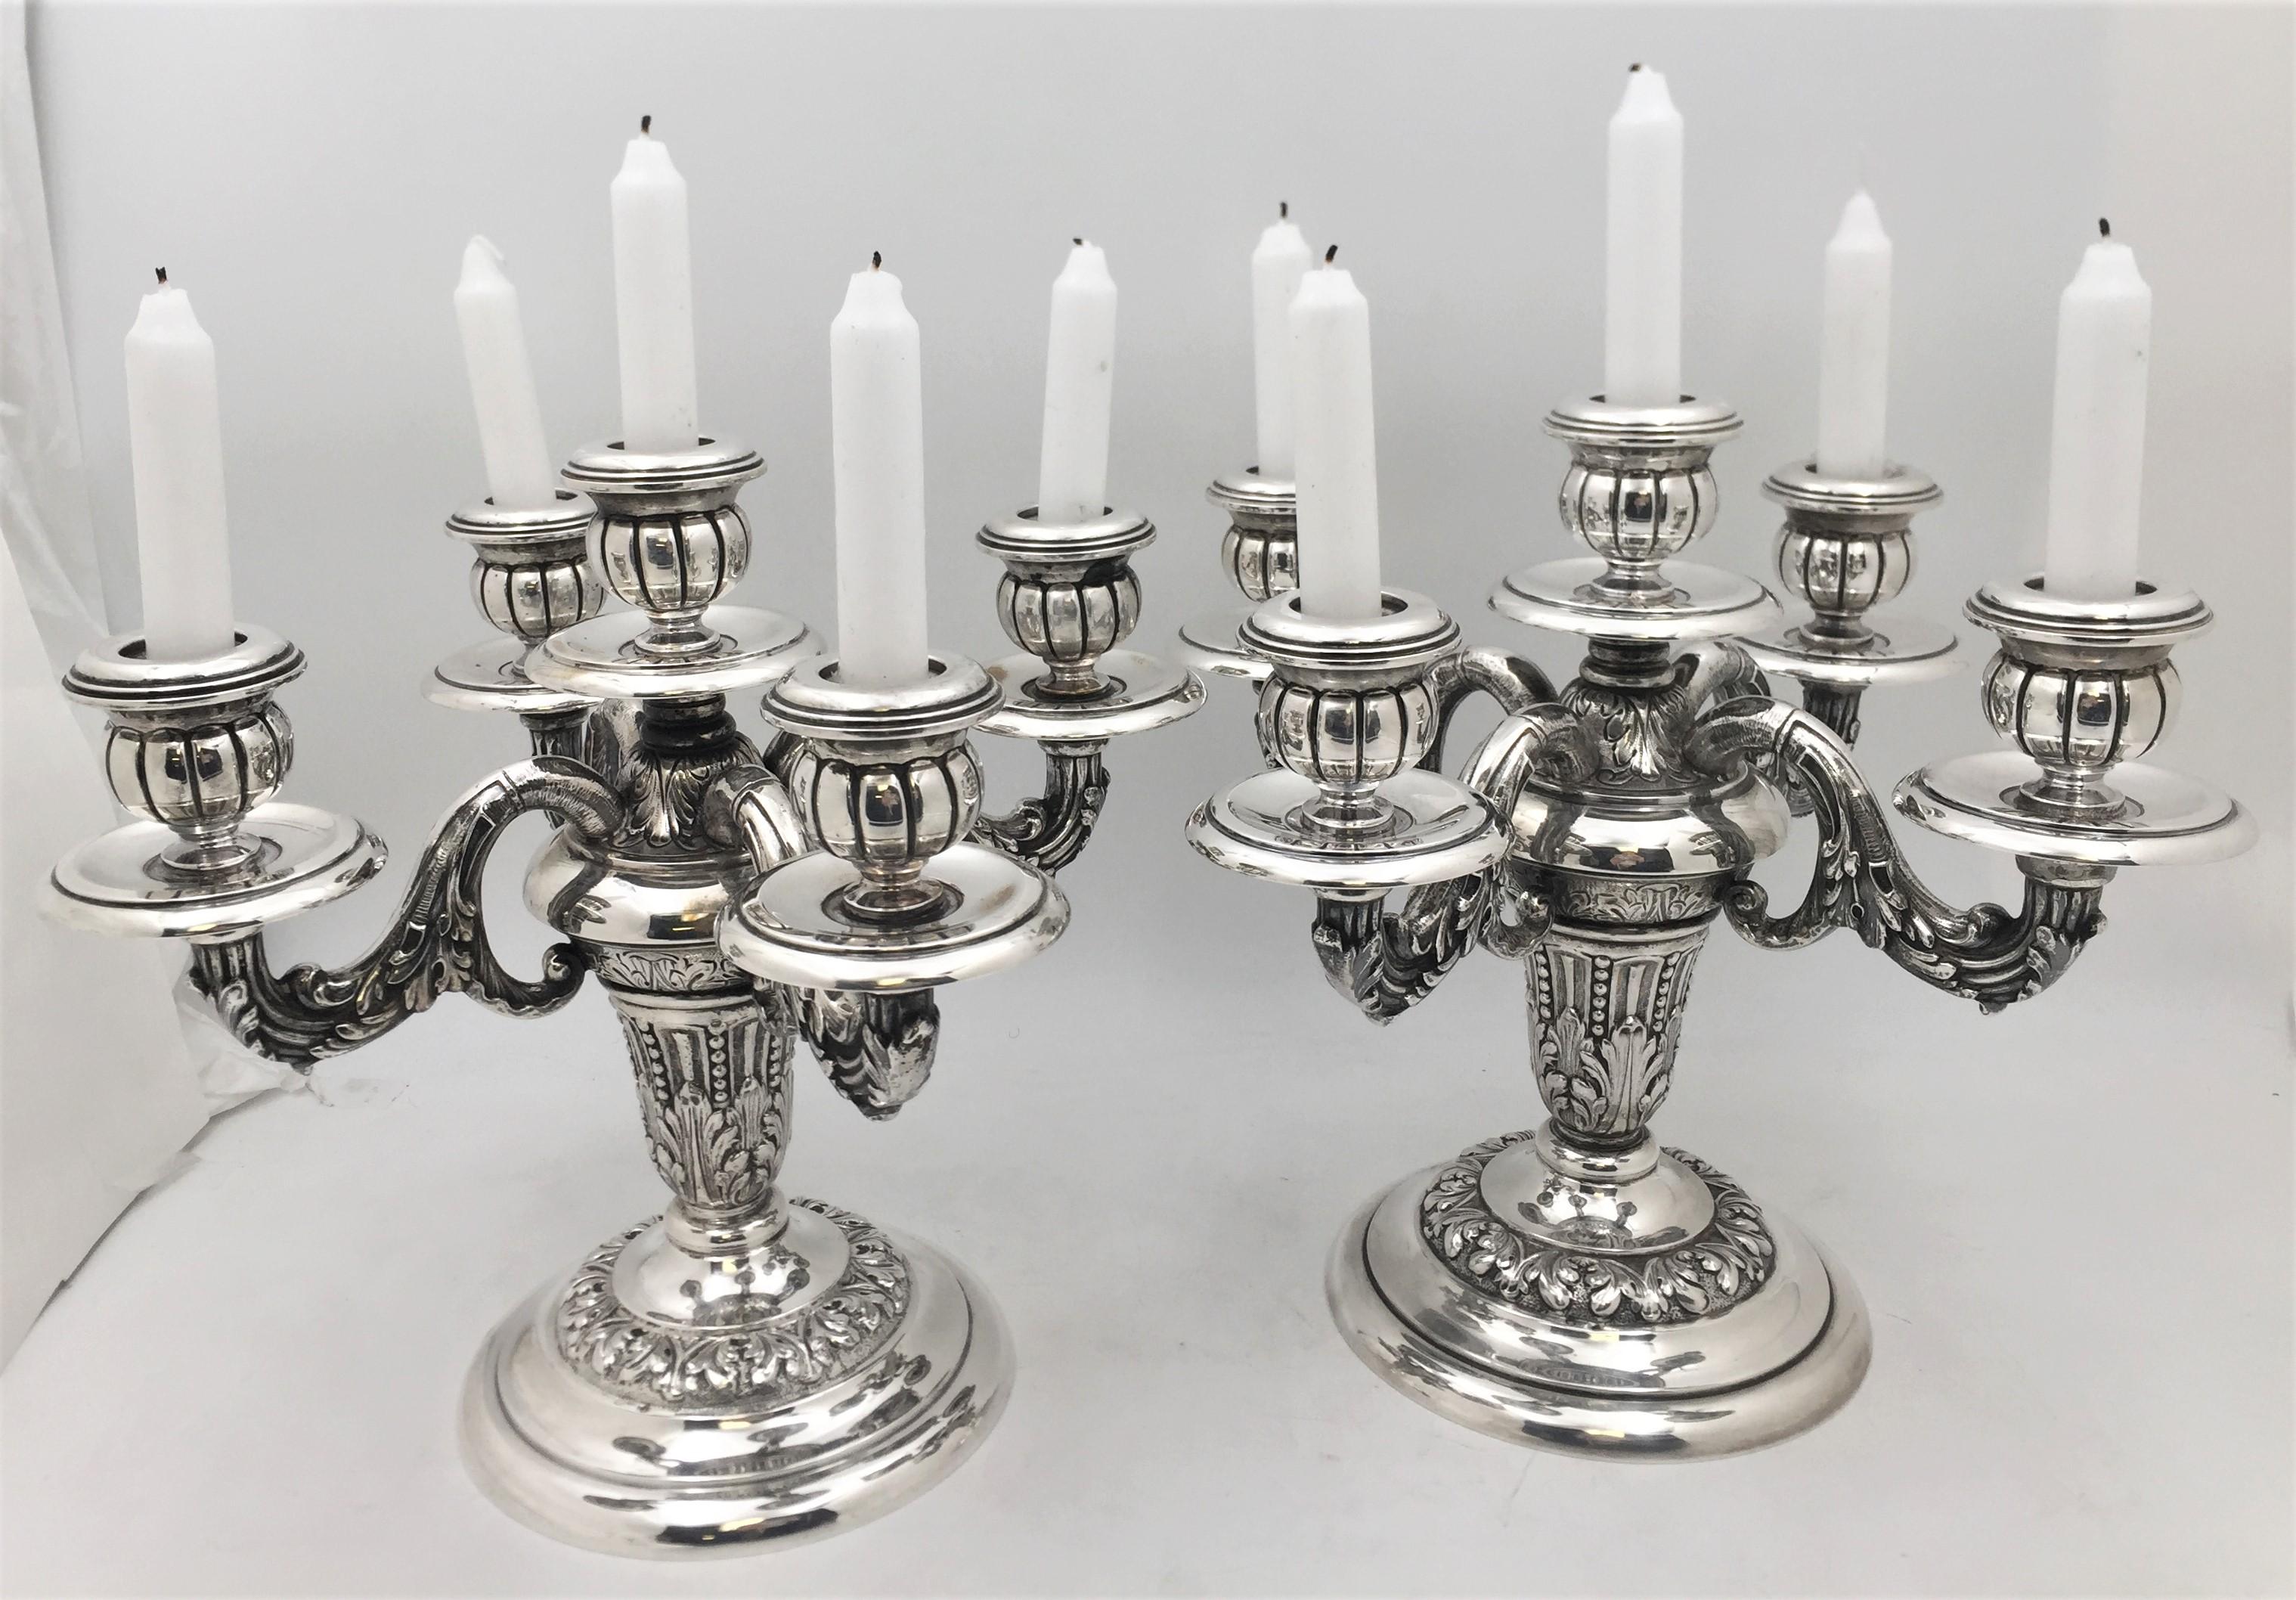 Pair of Portuguese silver, 5-light candelabra in an ornate style with leaves motifs across the body and the arms. These well-proportioned and elegant candelabra measure 11 1/3'' in height by 12 1/4'' from arm to arm. They are weighted but the